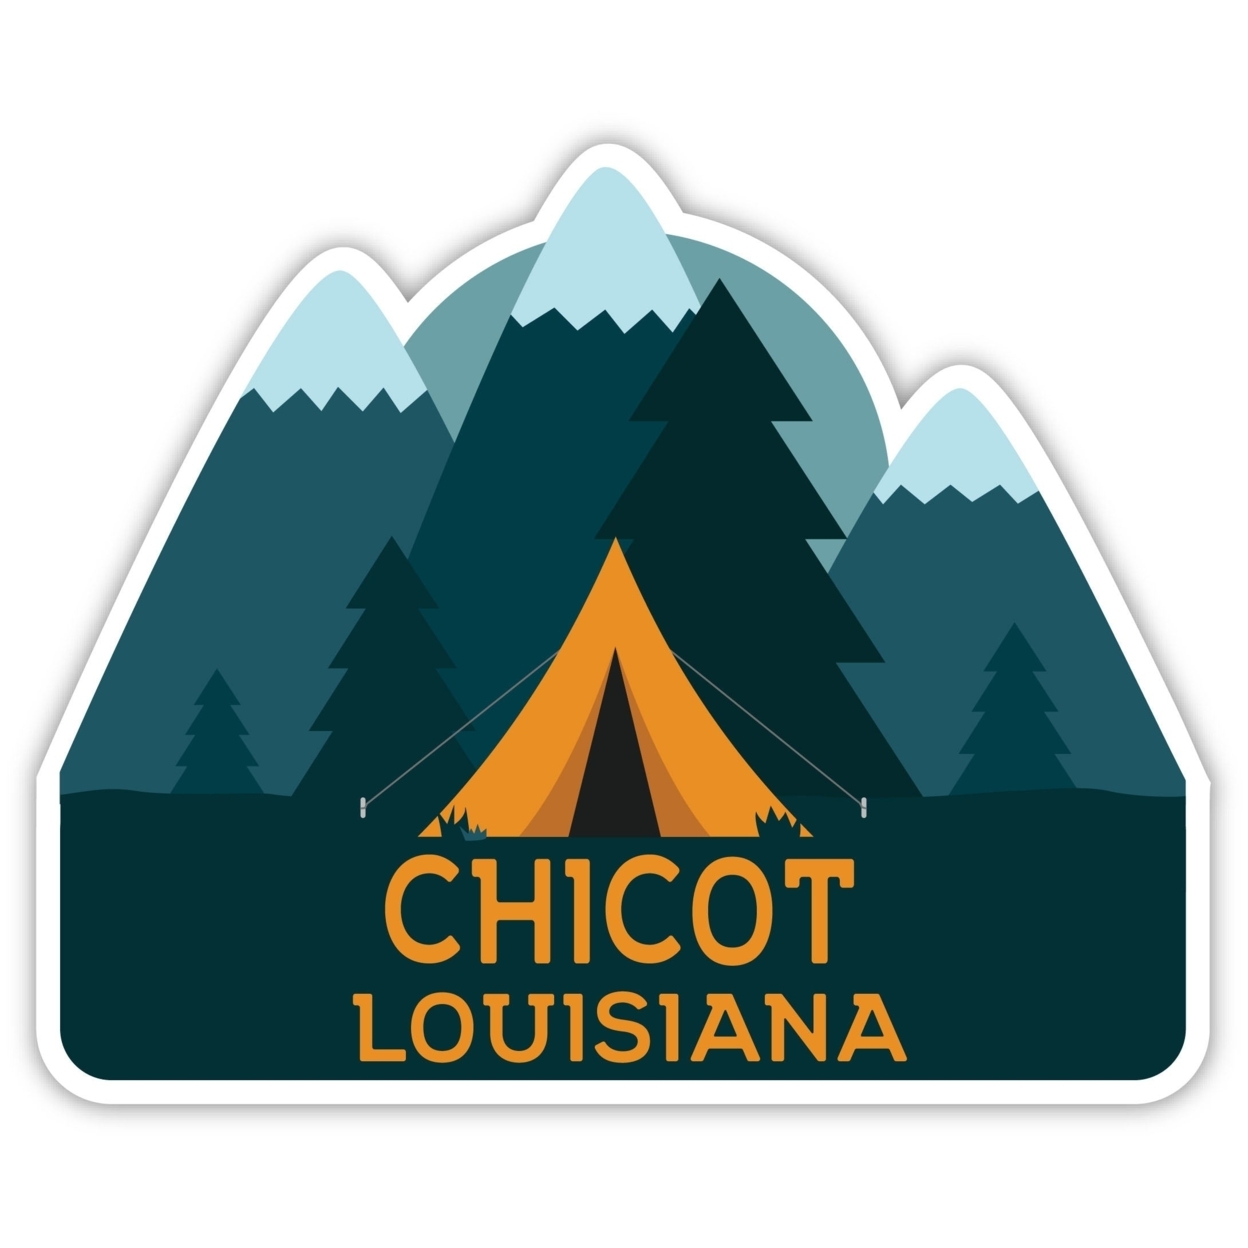 Chicot Louisiana Souvenir Decorative Stickers (Choose Theme And Size) - 4-Pack, 4-Inch, Tent